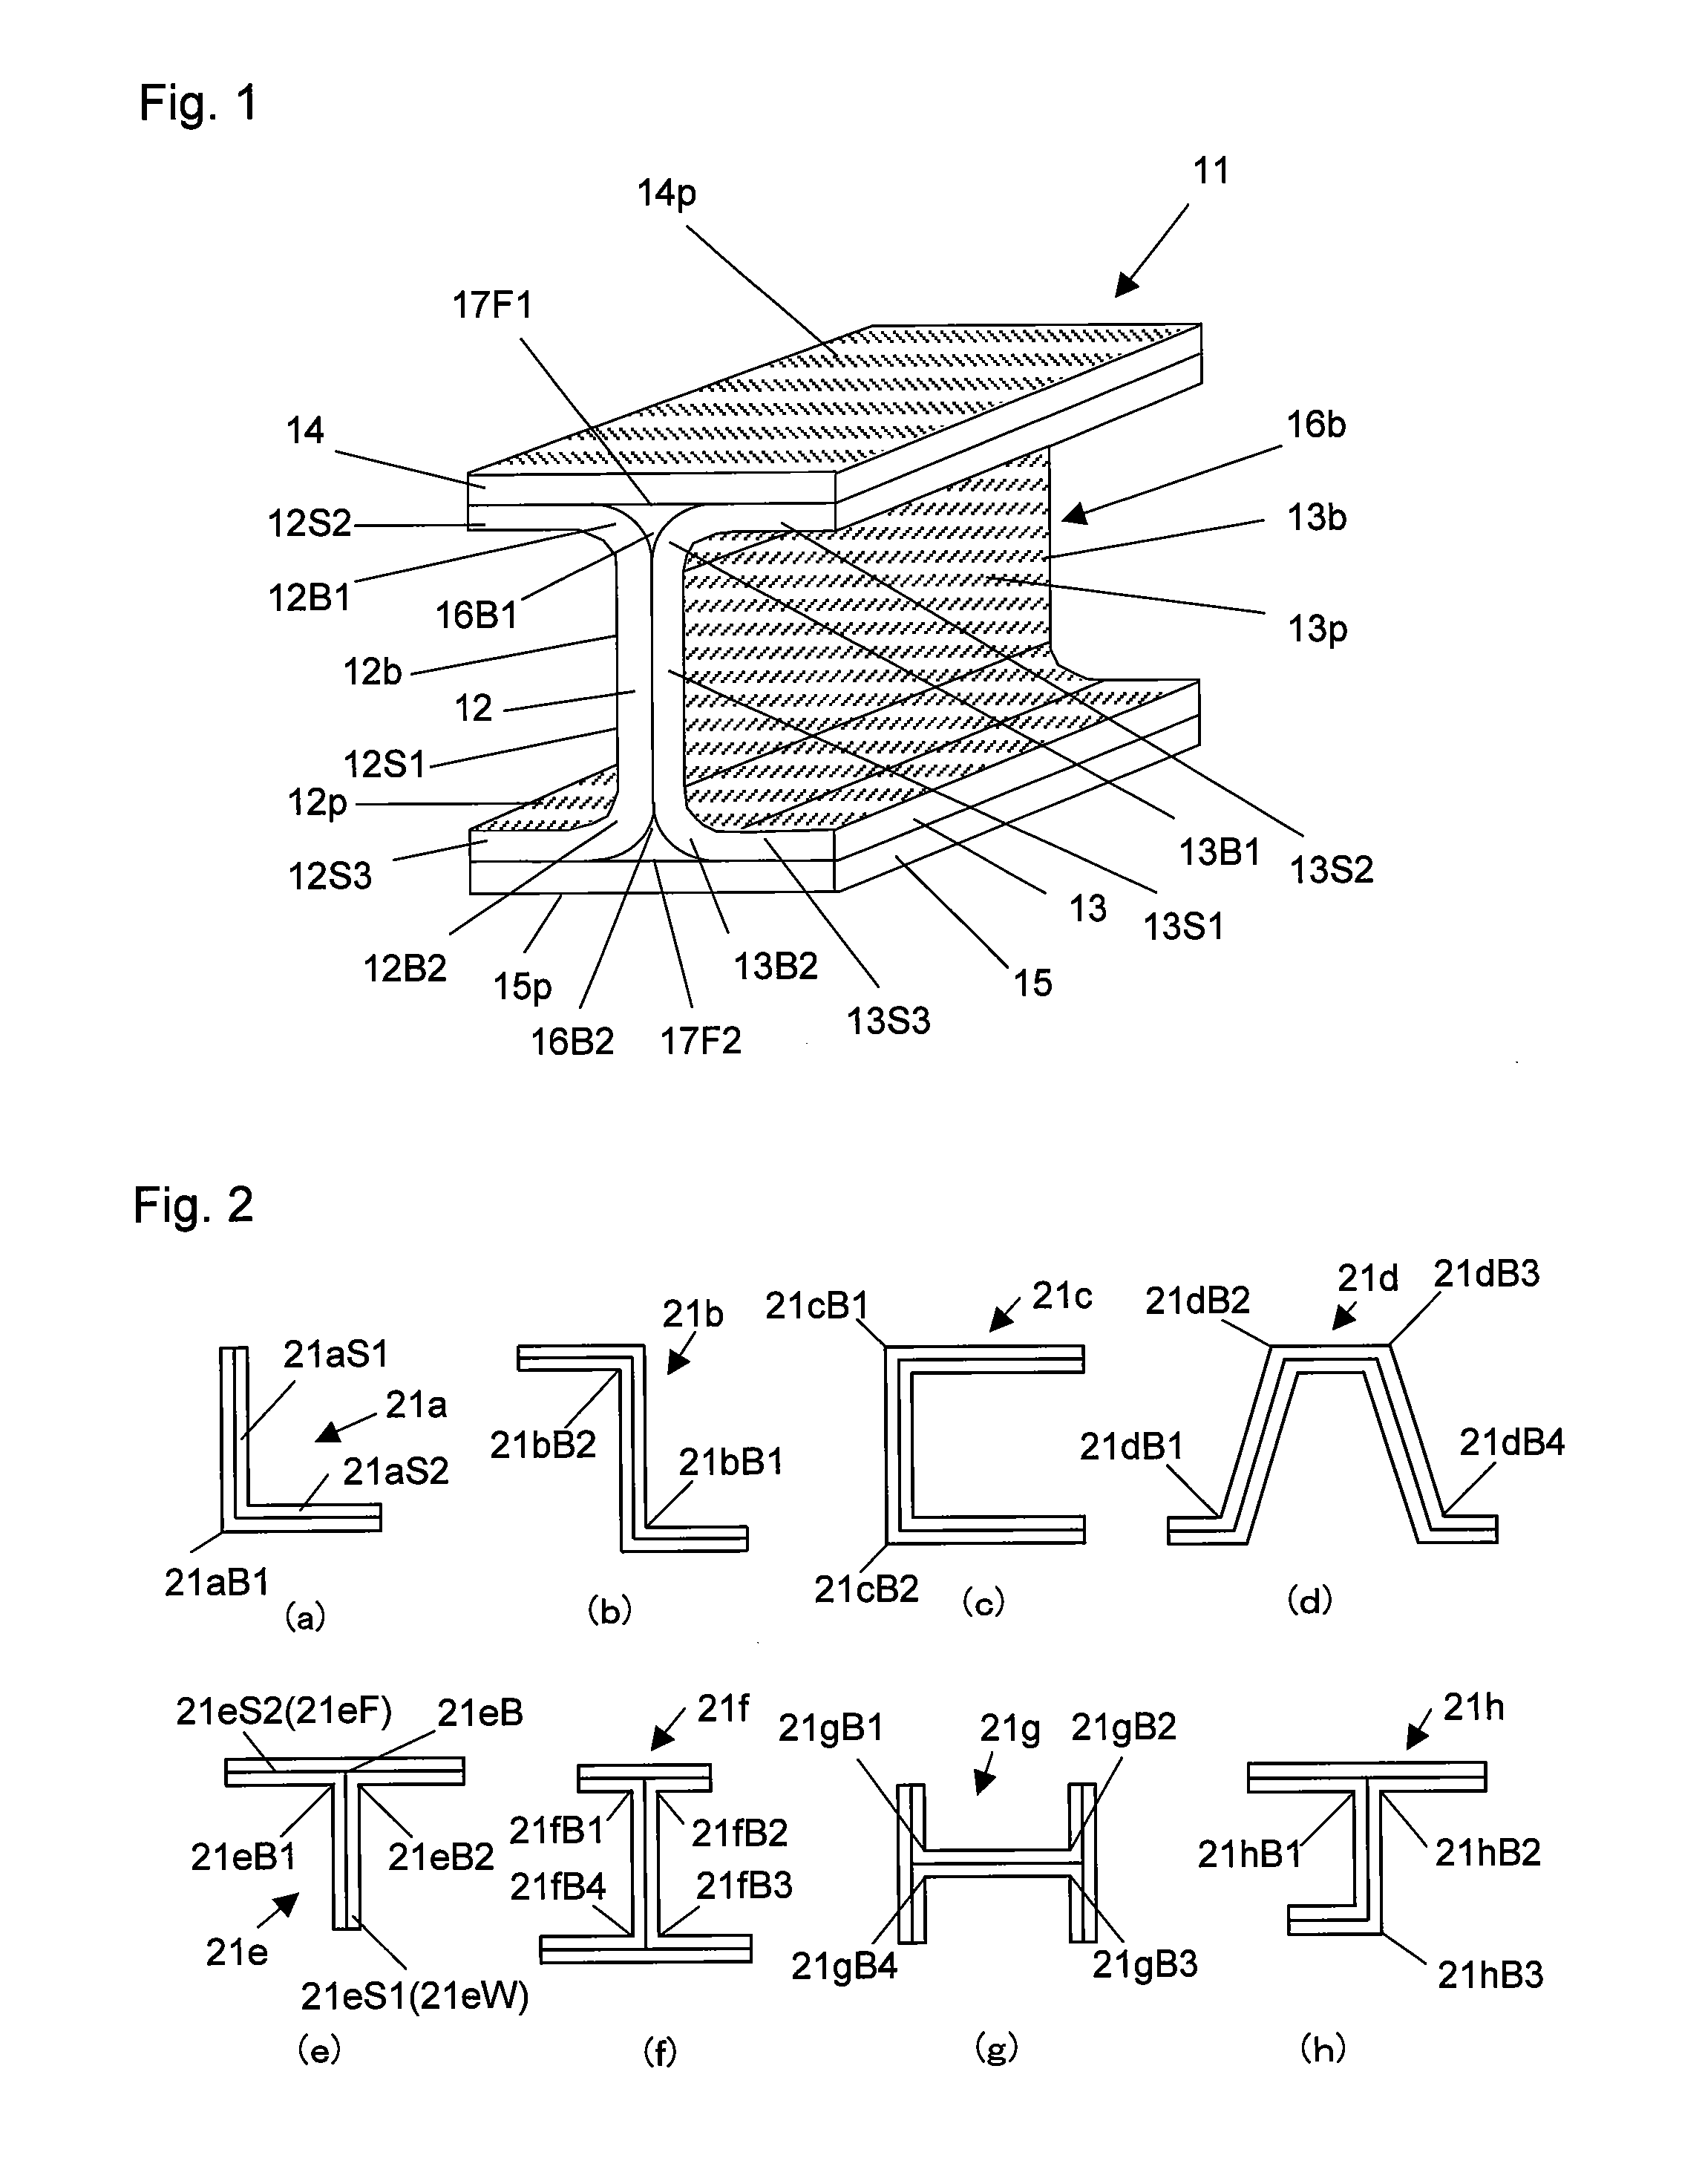 Preform for molding fiber-reinforced resin beam, process for producing the same, apparatus for producing the same, and process for producing fiber-reinforced resin beam